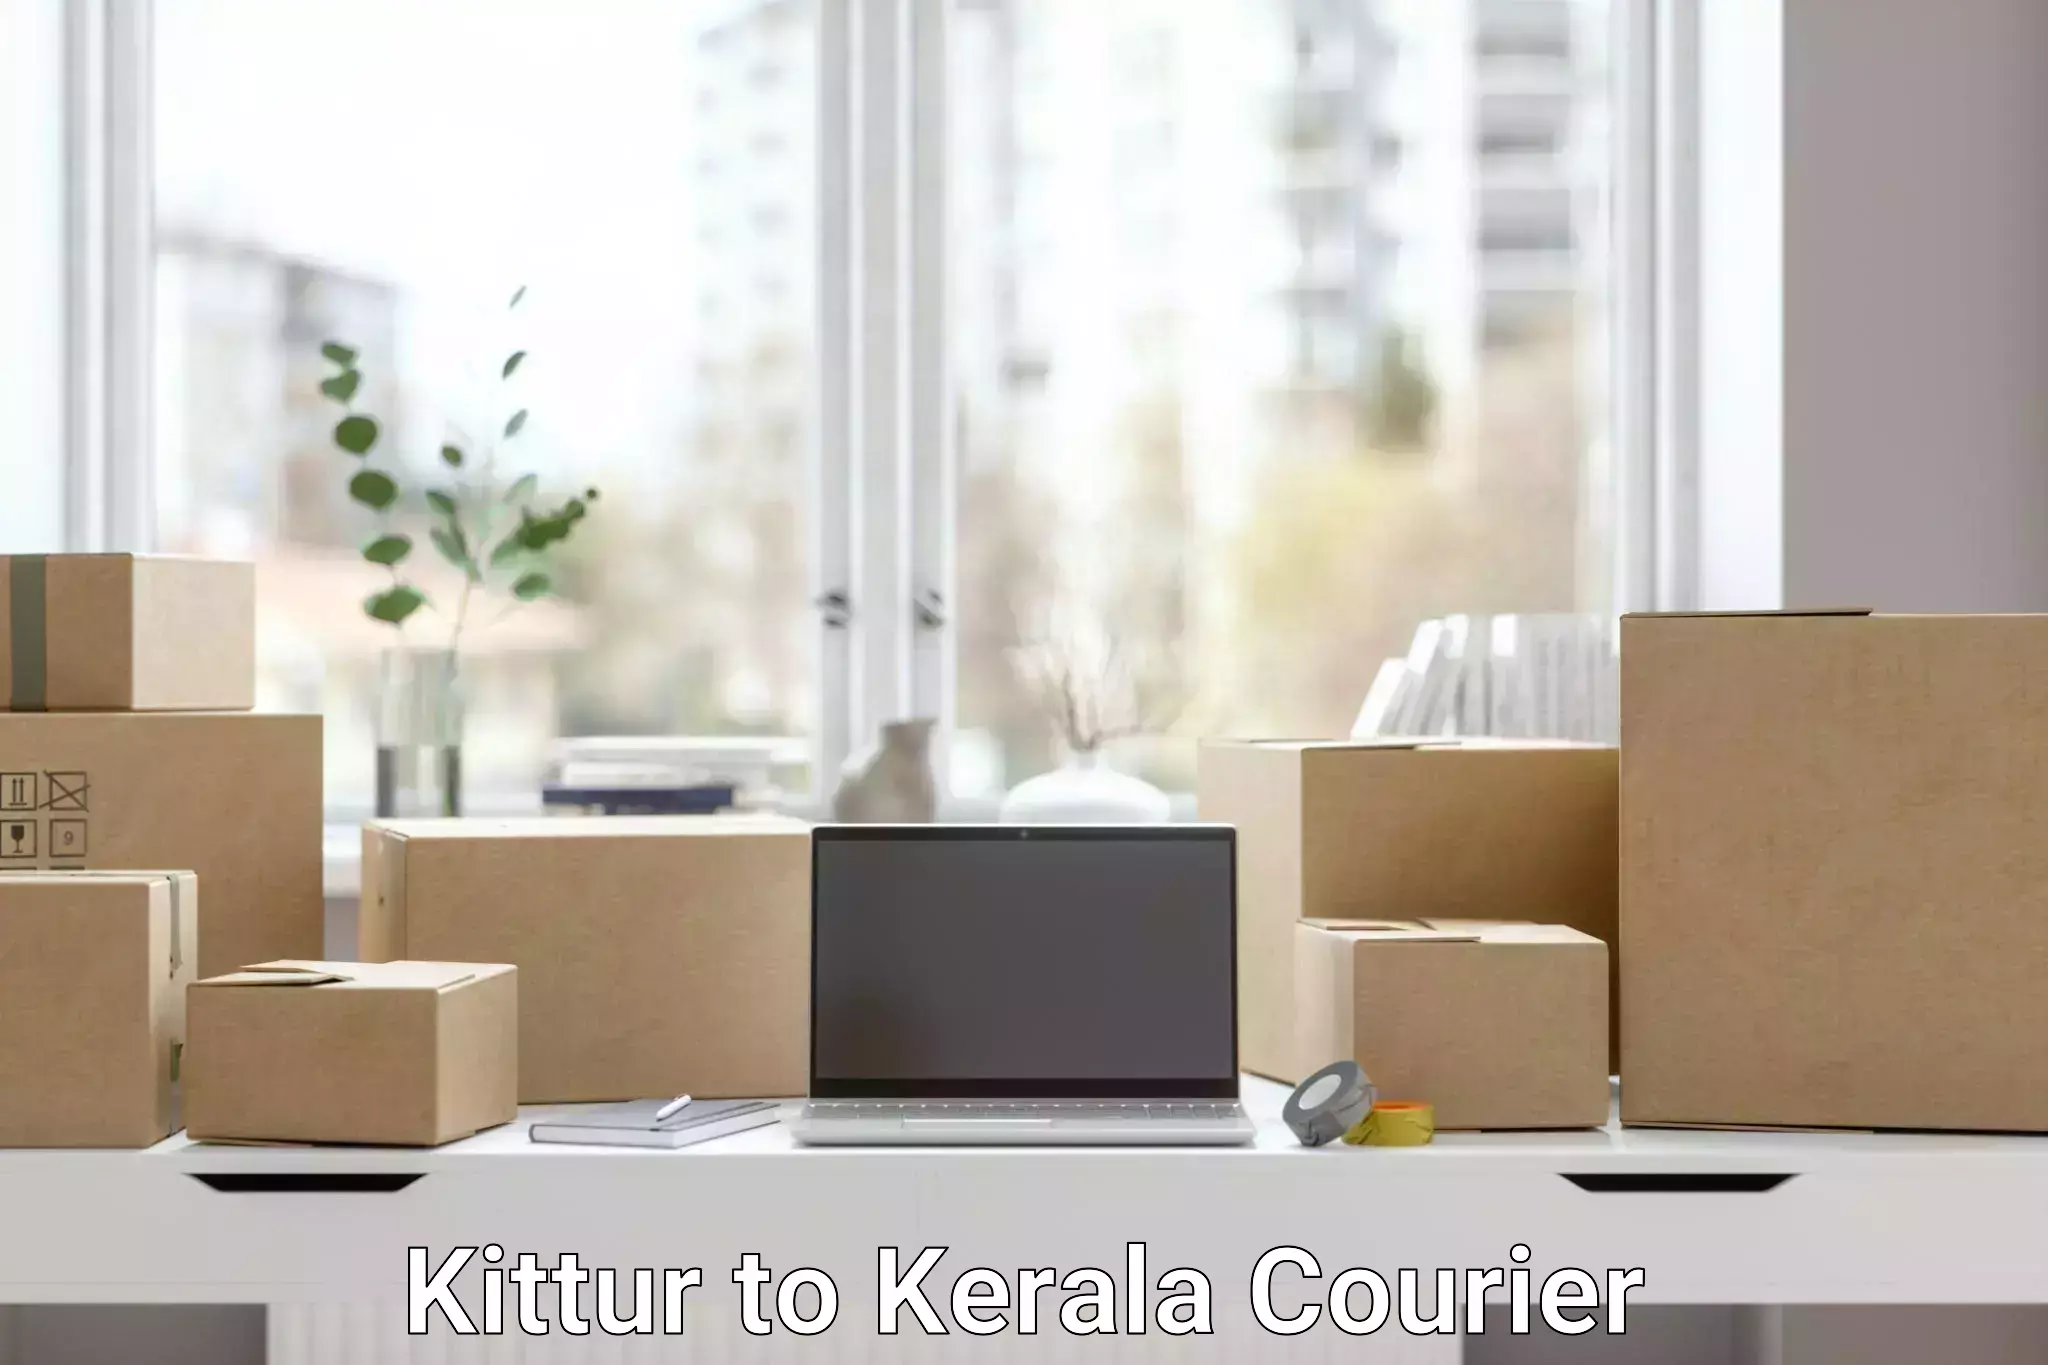 Express delivery capabilities Kittur to Chalakudy